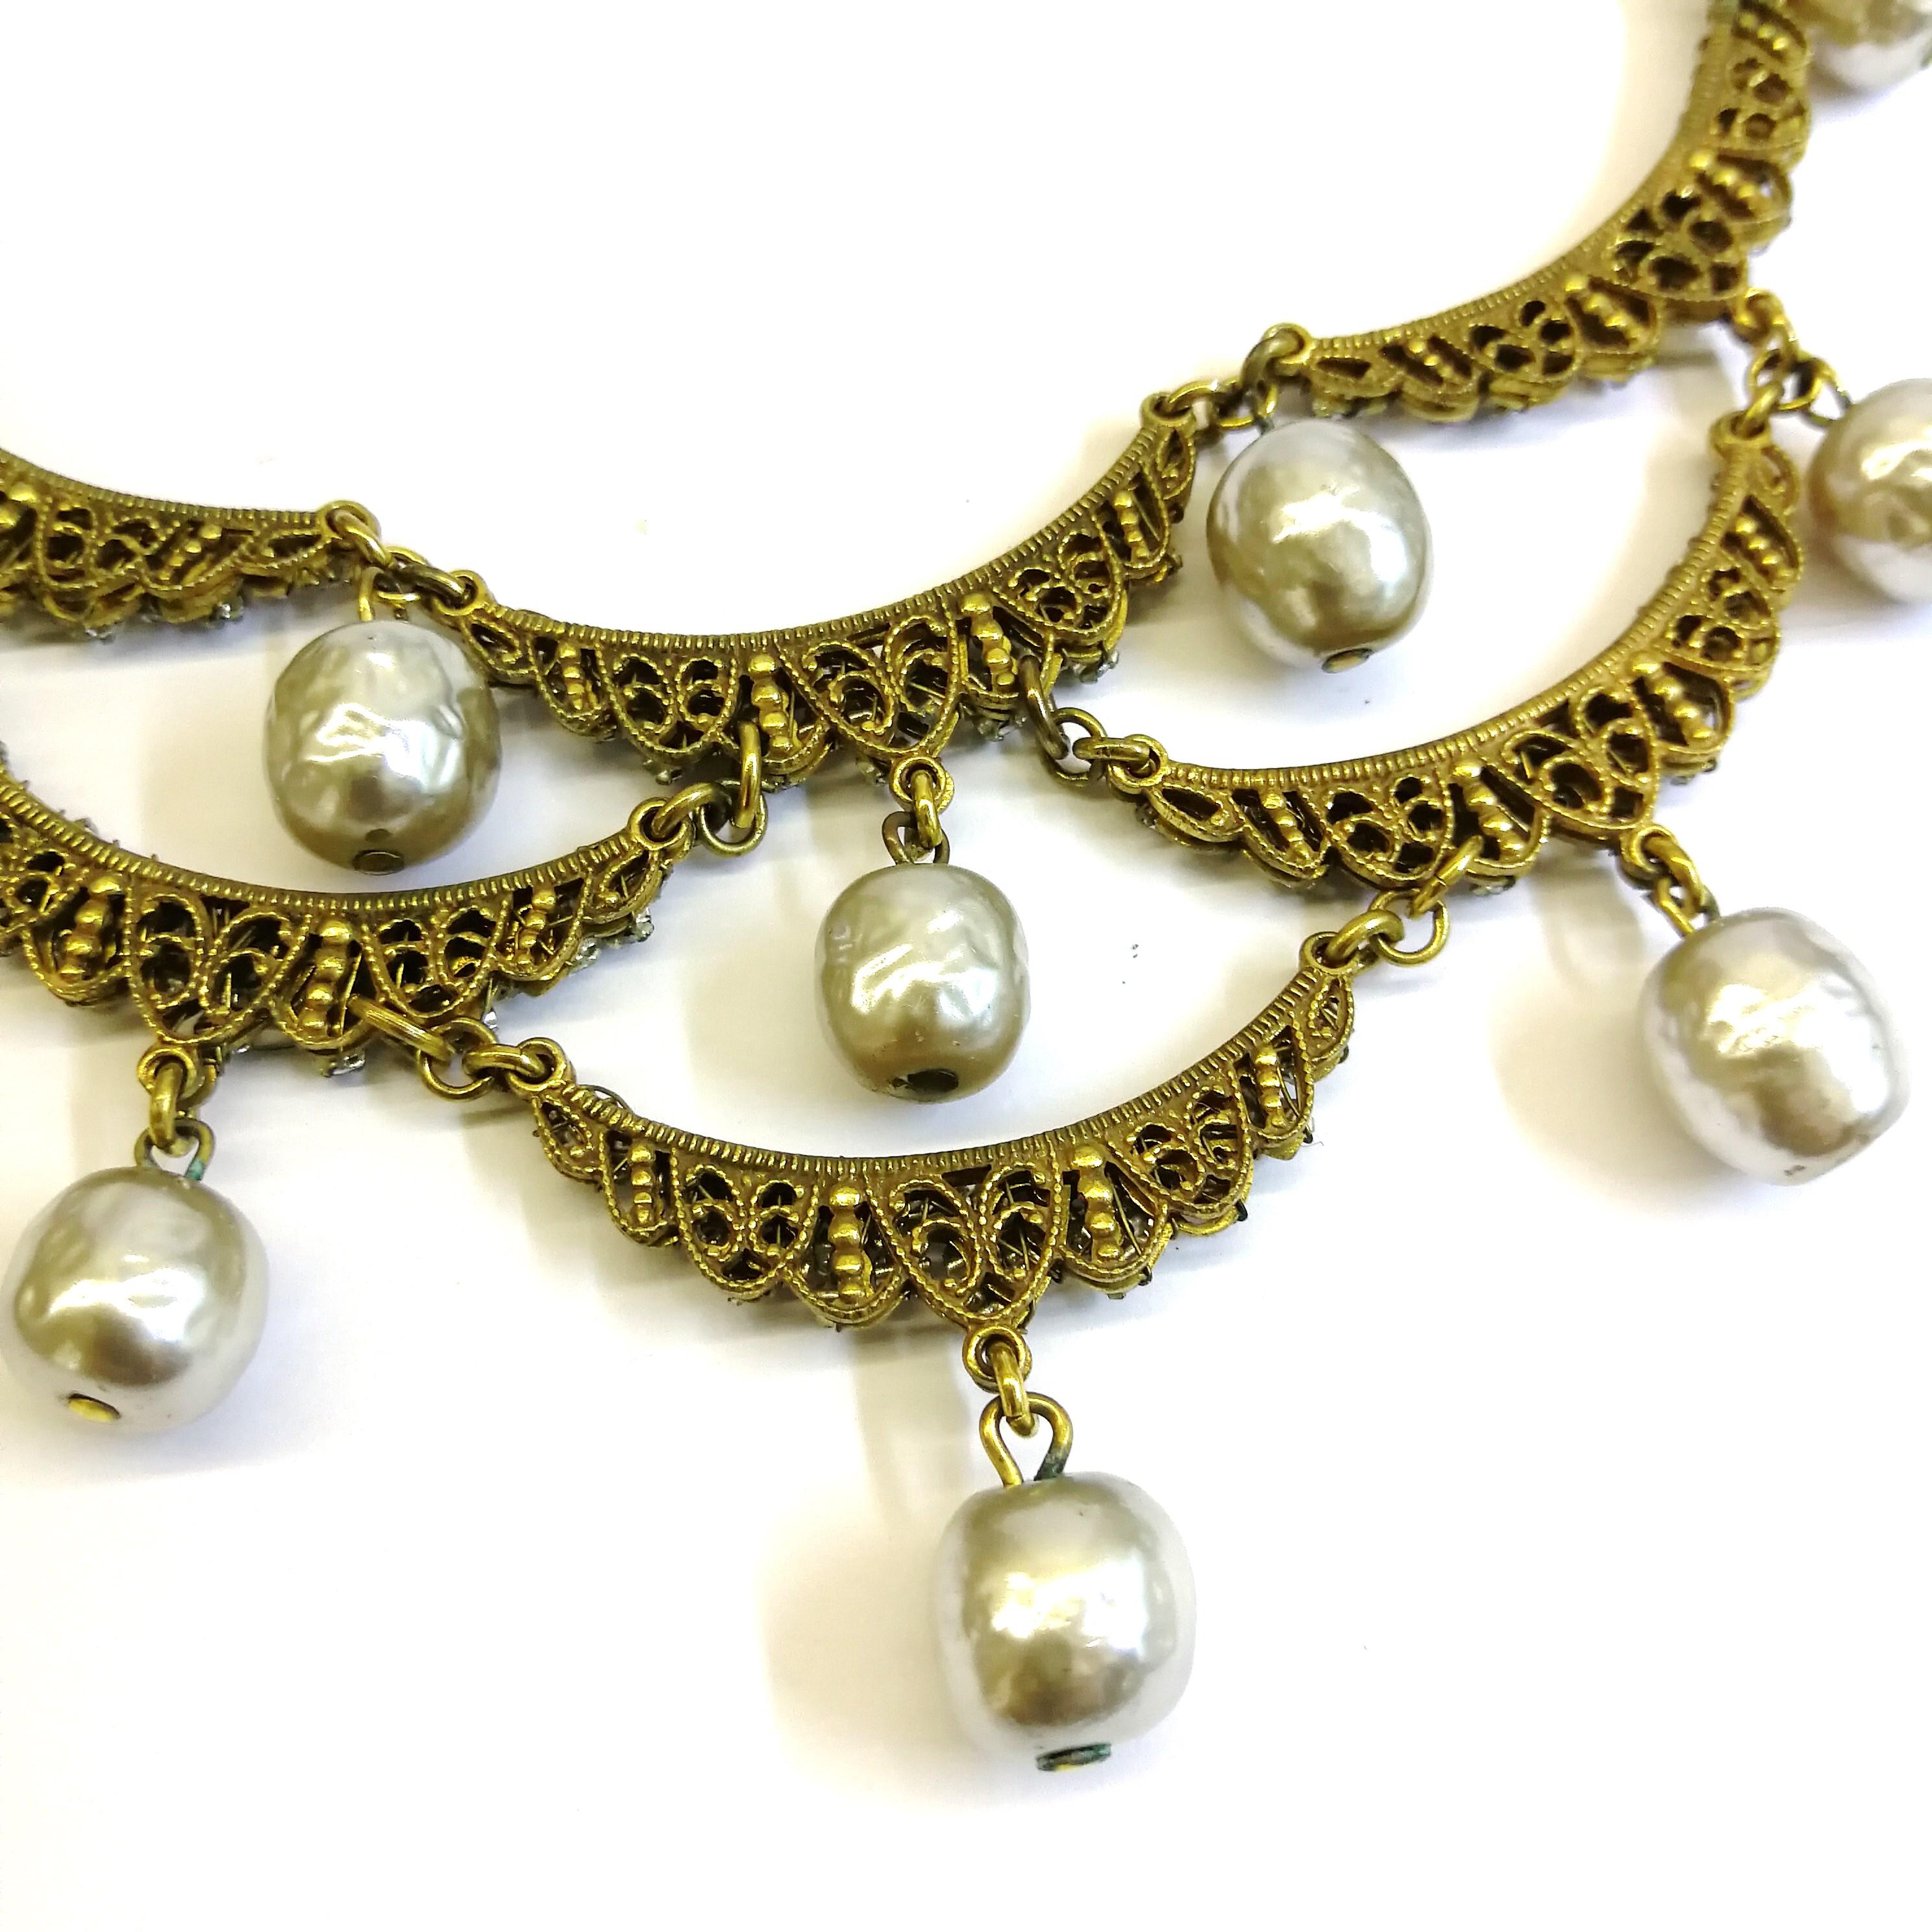 A necklace and earrings of gilded metal, paste and baroque pearl, Miriam Haskell 3